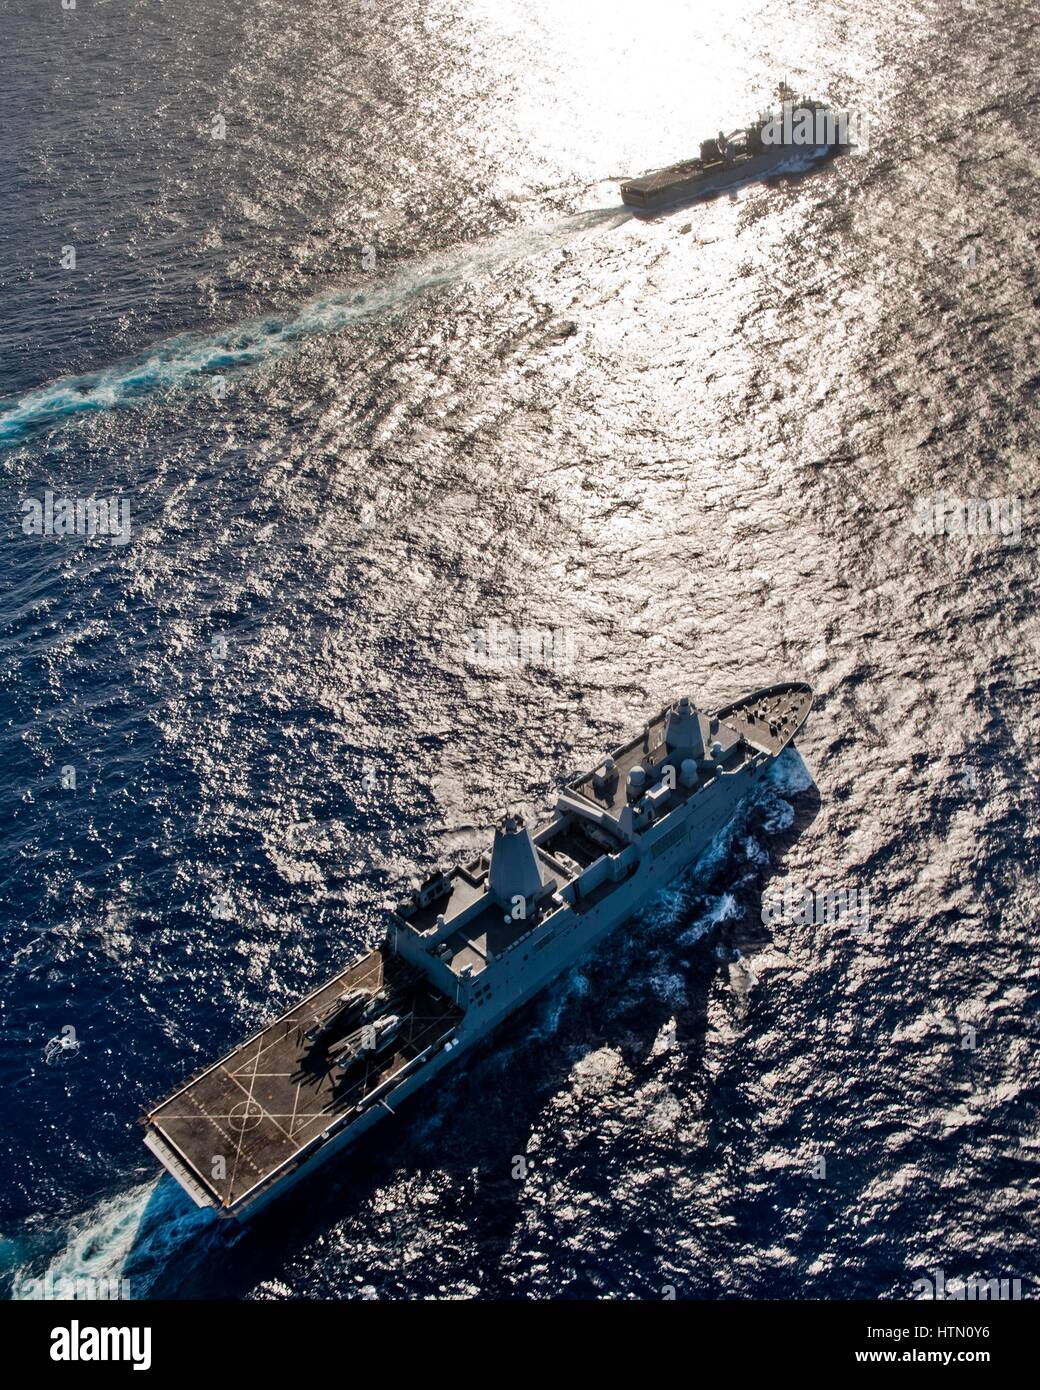 The USN San Antonio-class amphibious transport dock ship USS New York (front) and the USN Whidbey Island-class amphibious dock landing ship USS Gunston Hall steam in formation December 10, 2012 in the Atlantic Ocean. Stock Photo